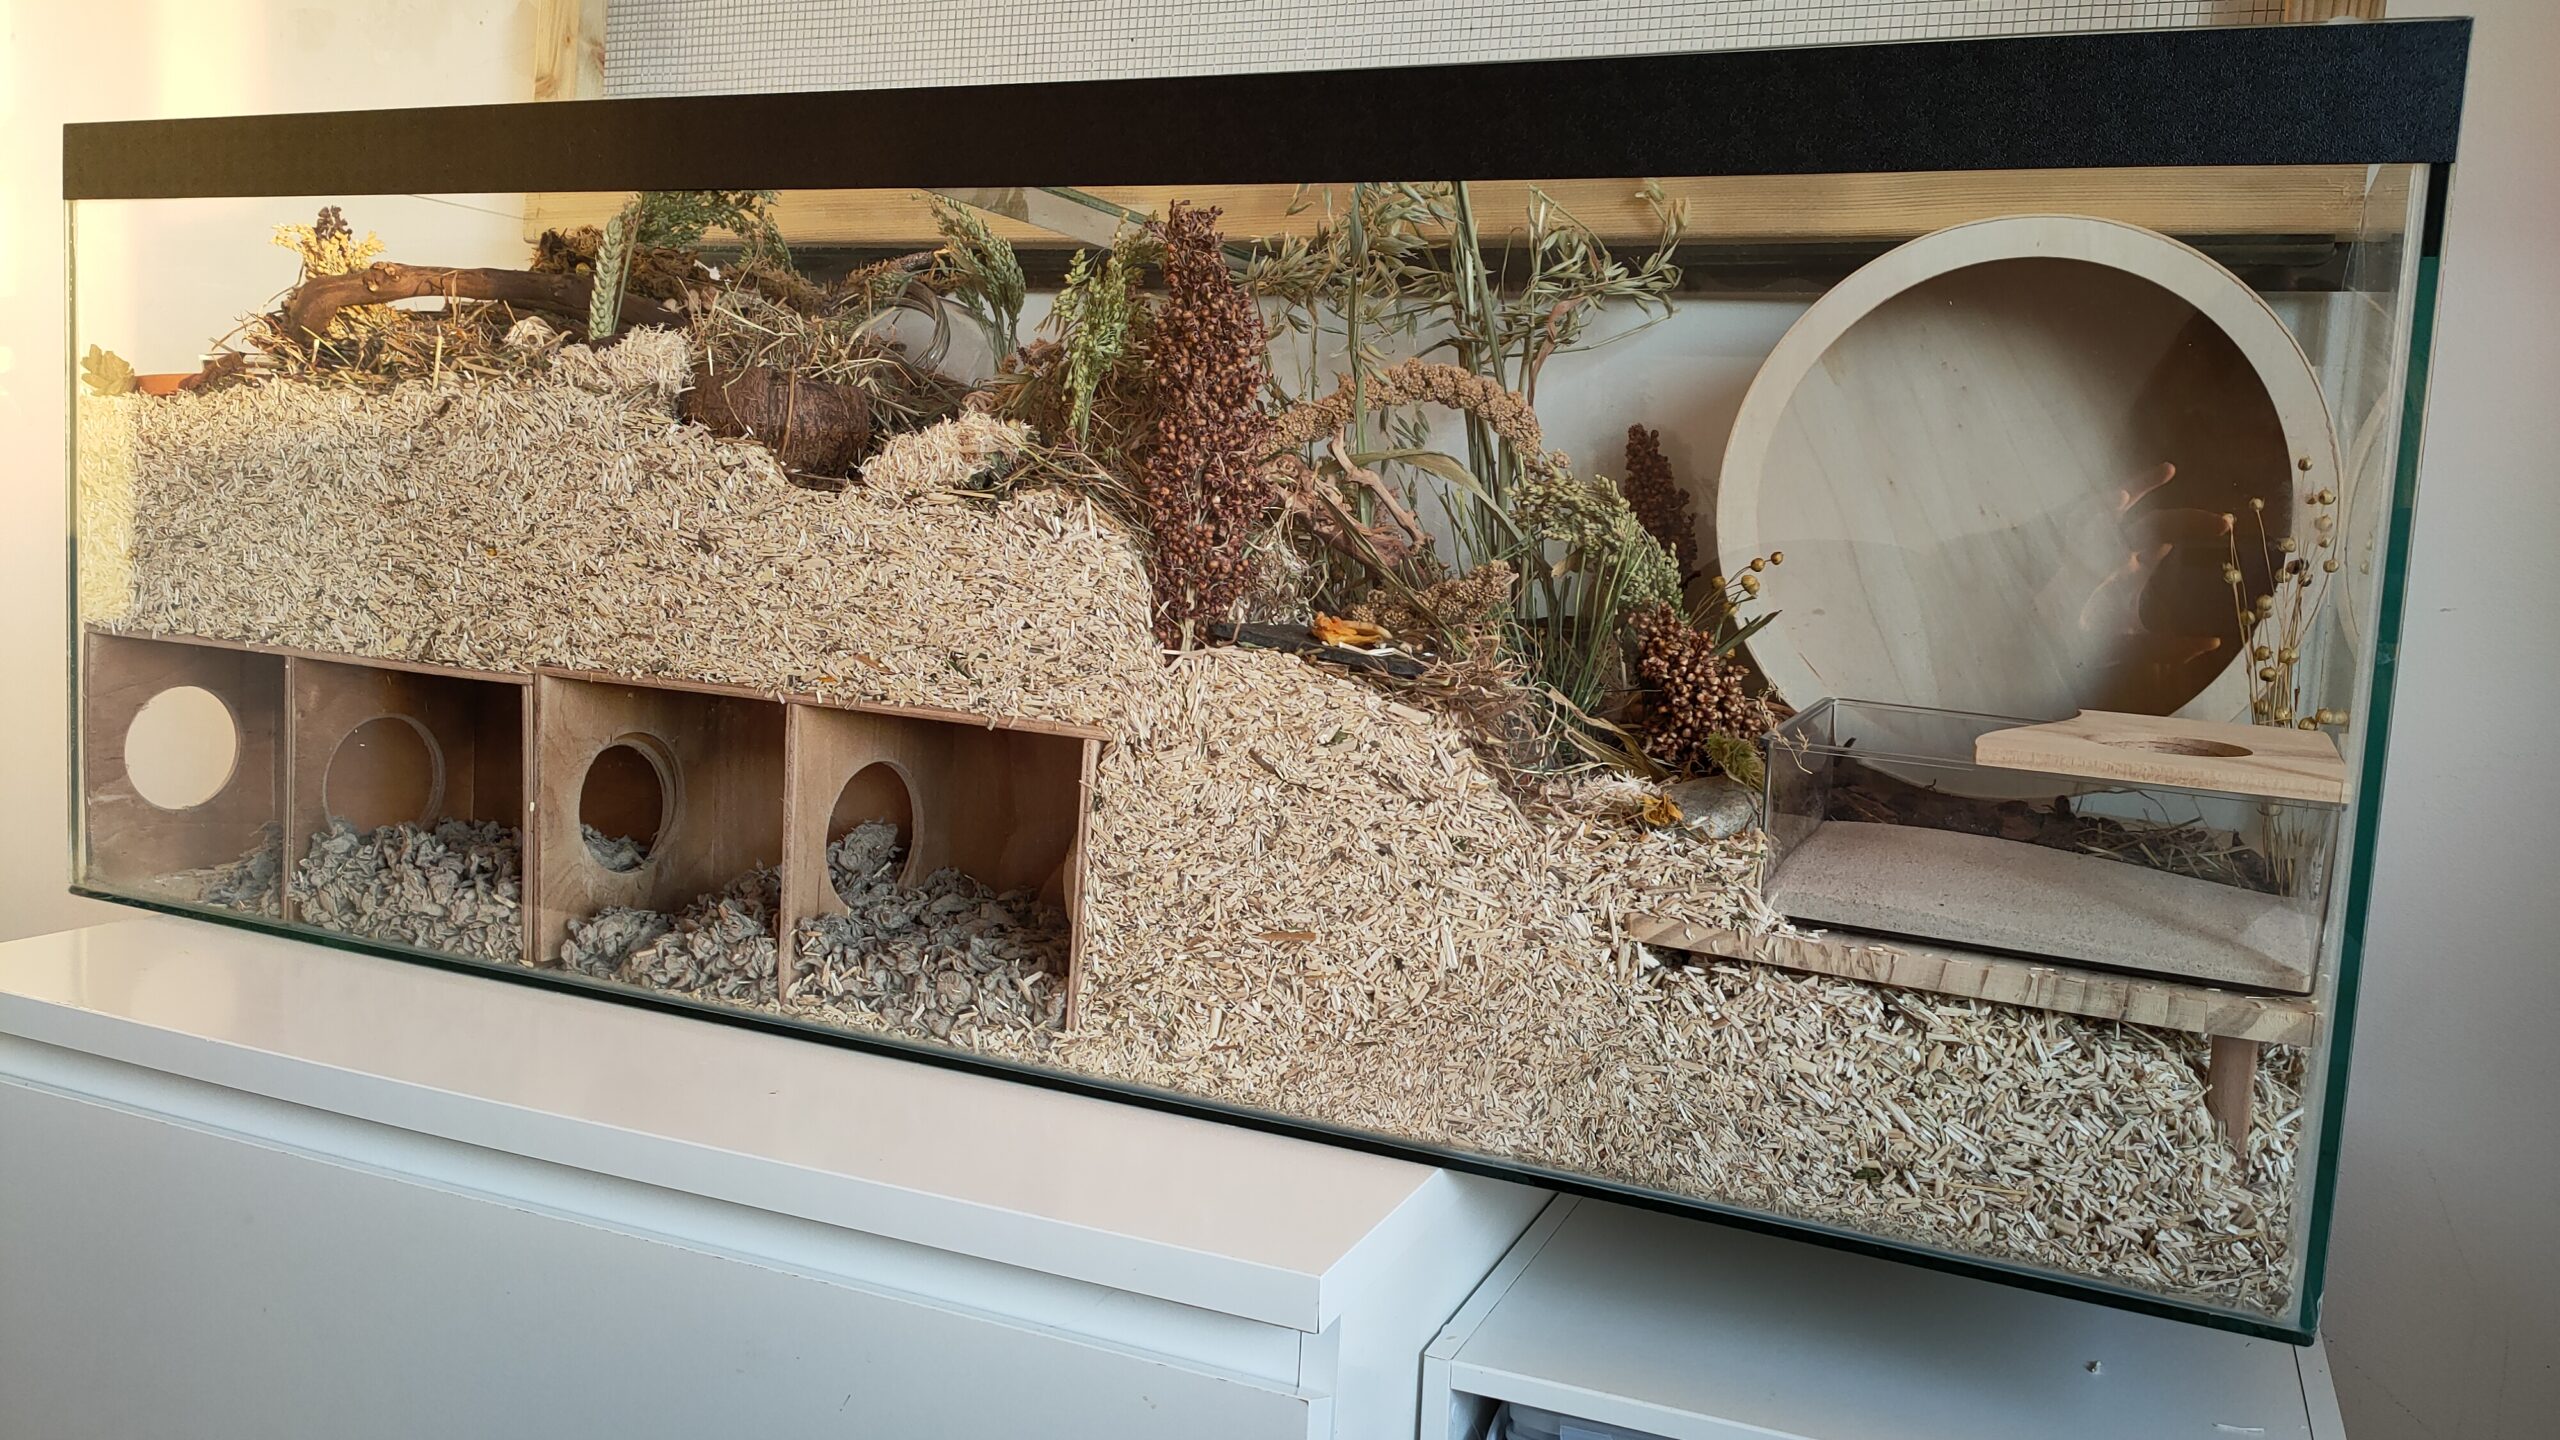 122cm glass Tank for a Syrian Hamster 